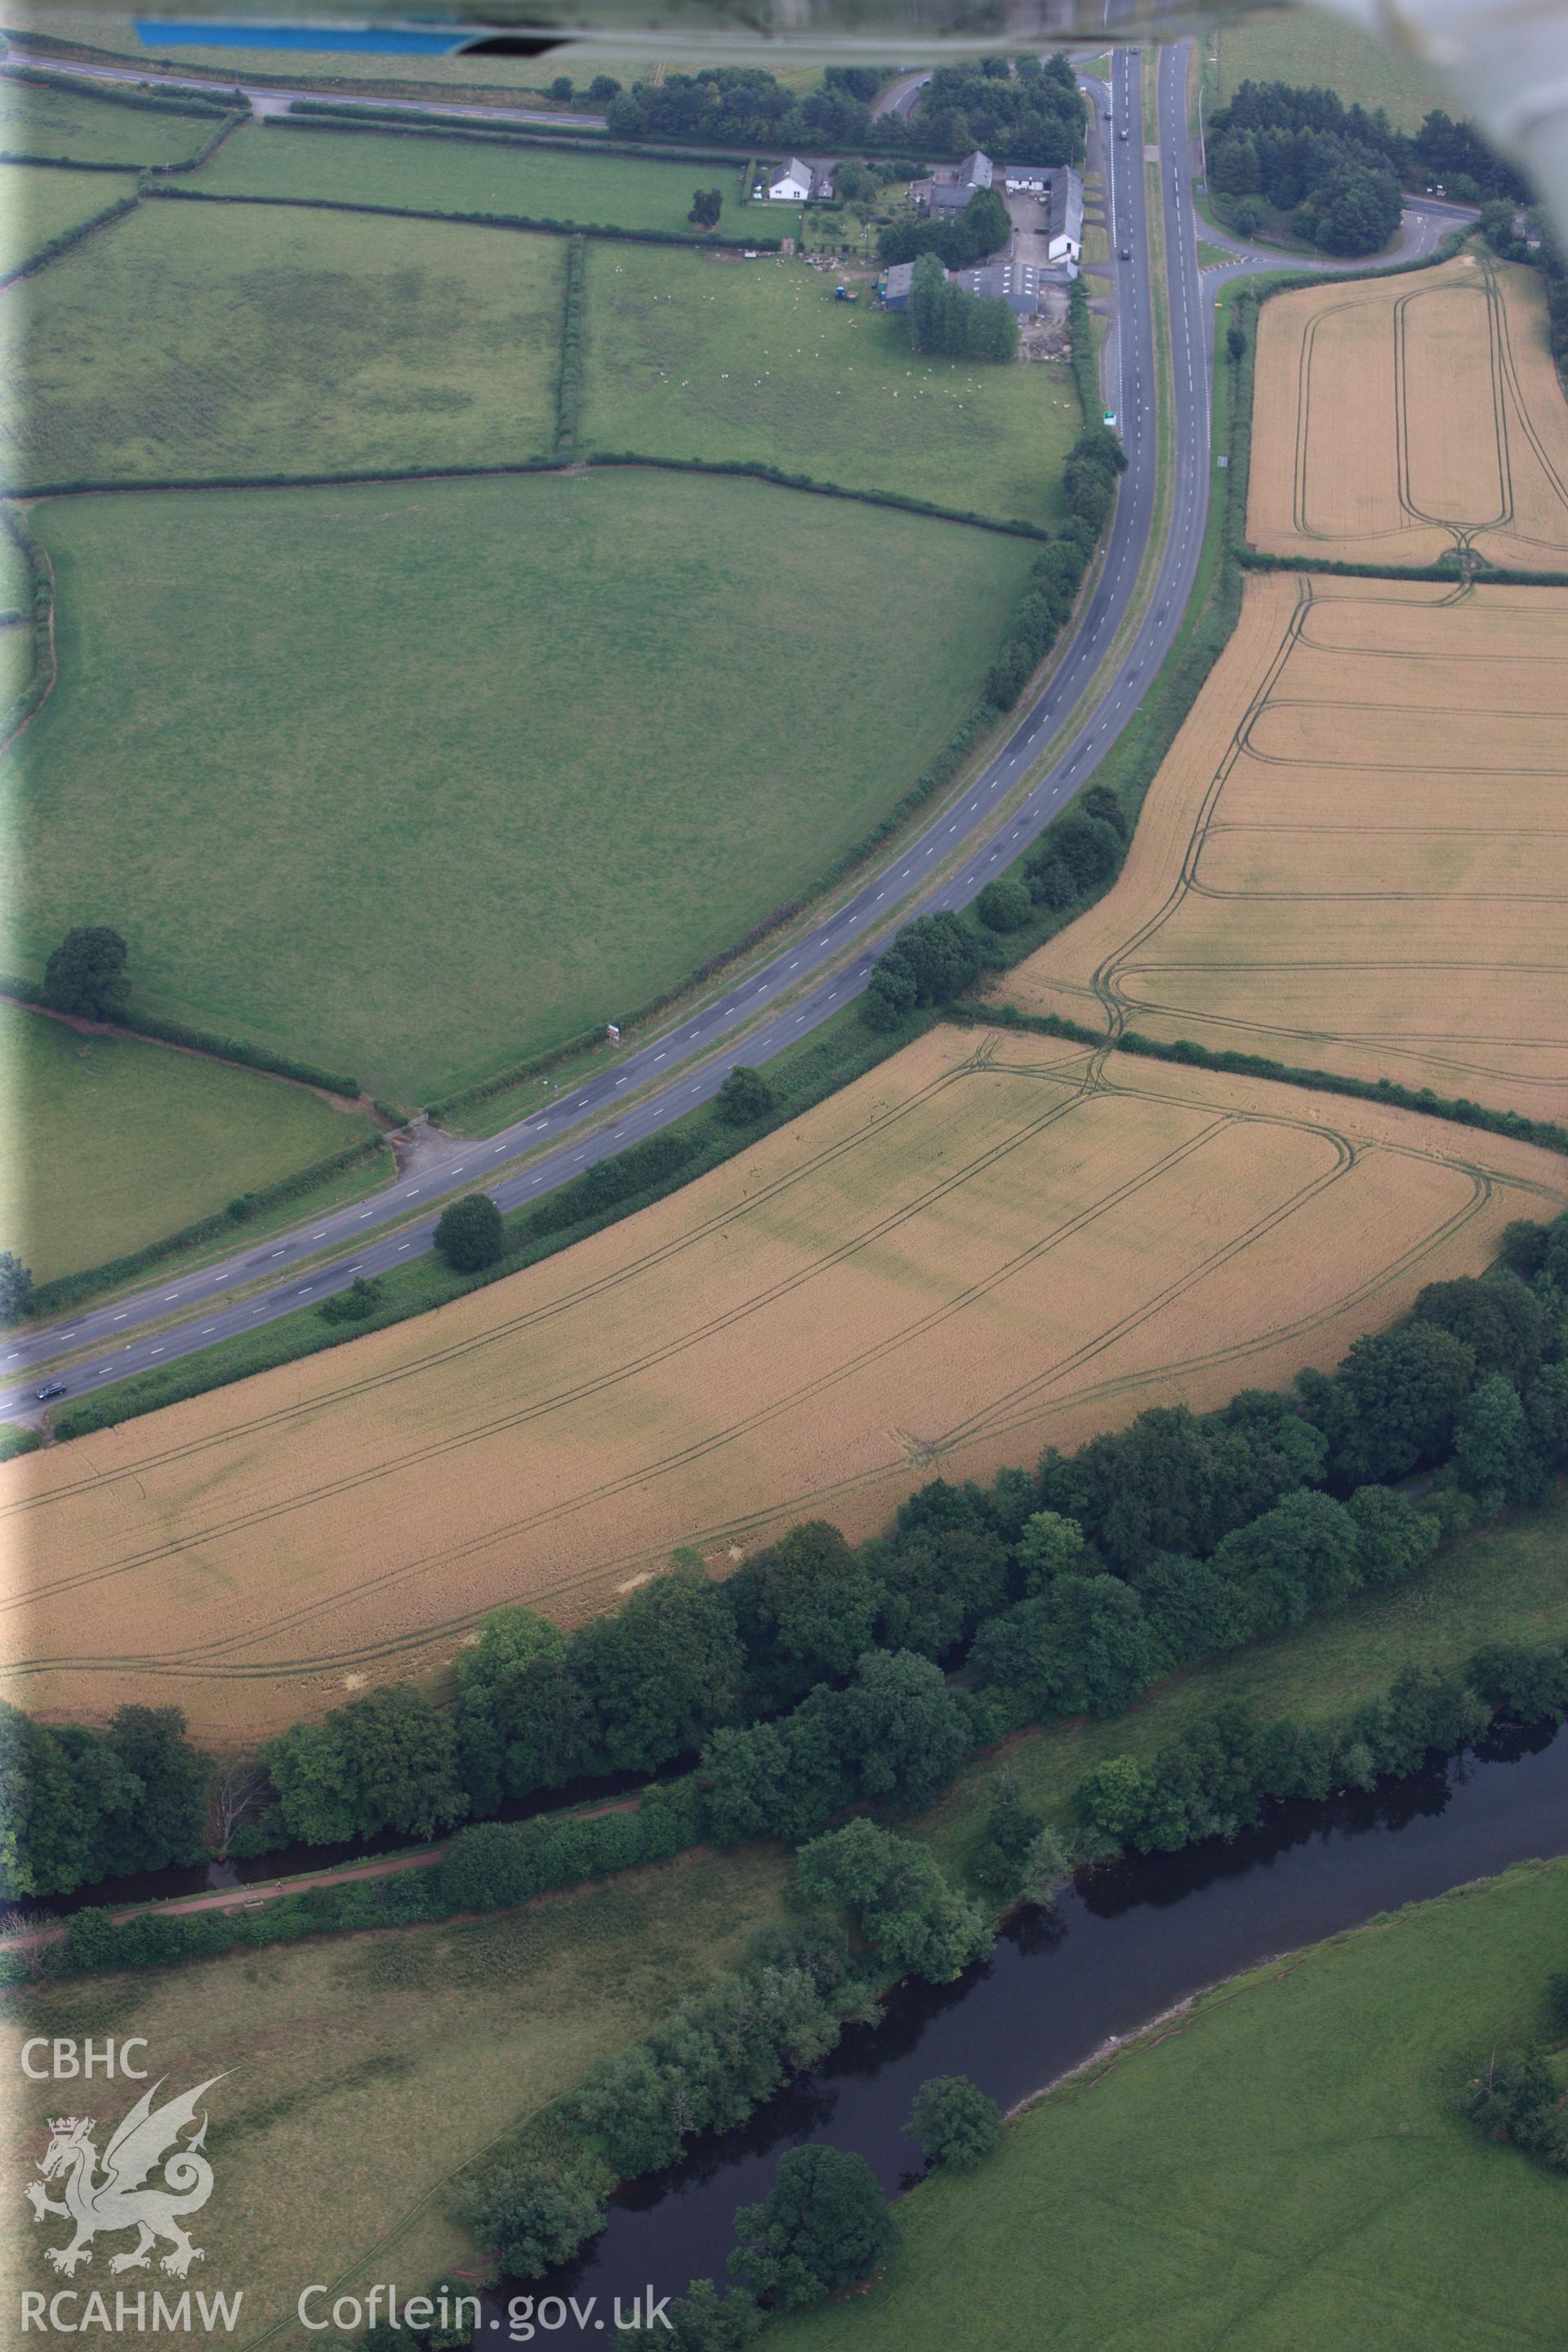 Cefn-brynich Roman fort, detailed view of cropmarks from west, taken by RCAHMW 1st August 2013.